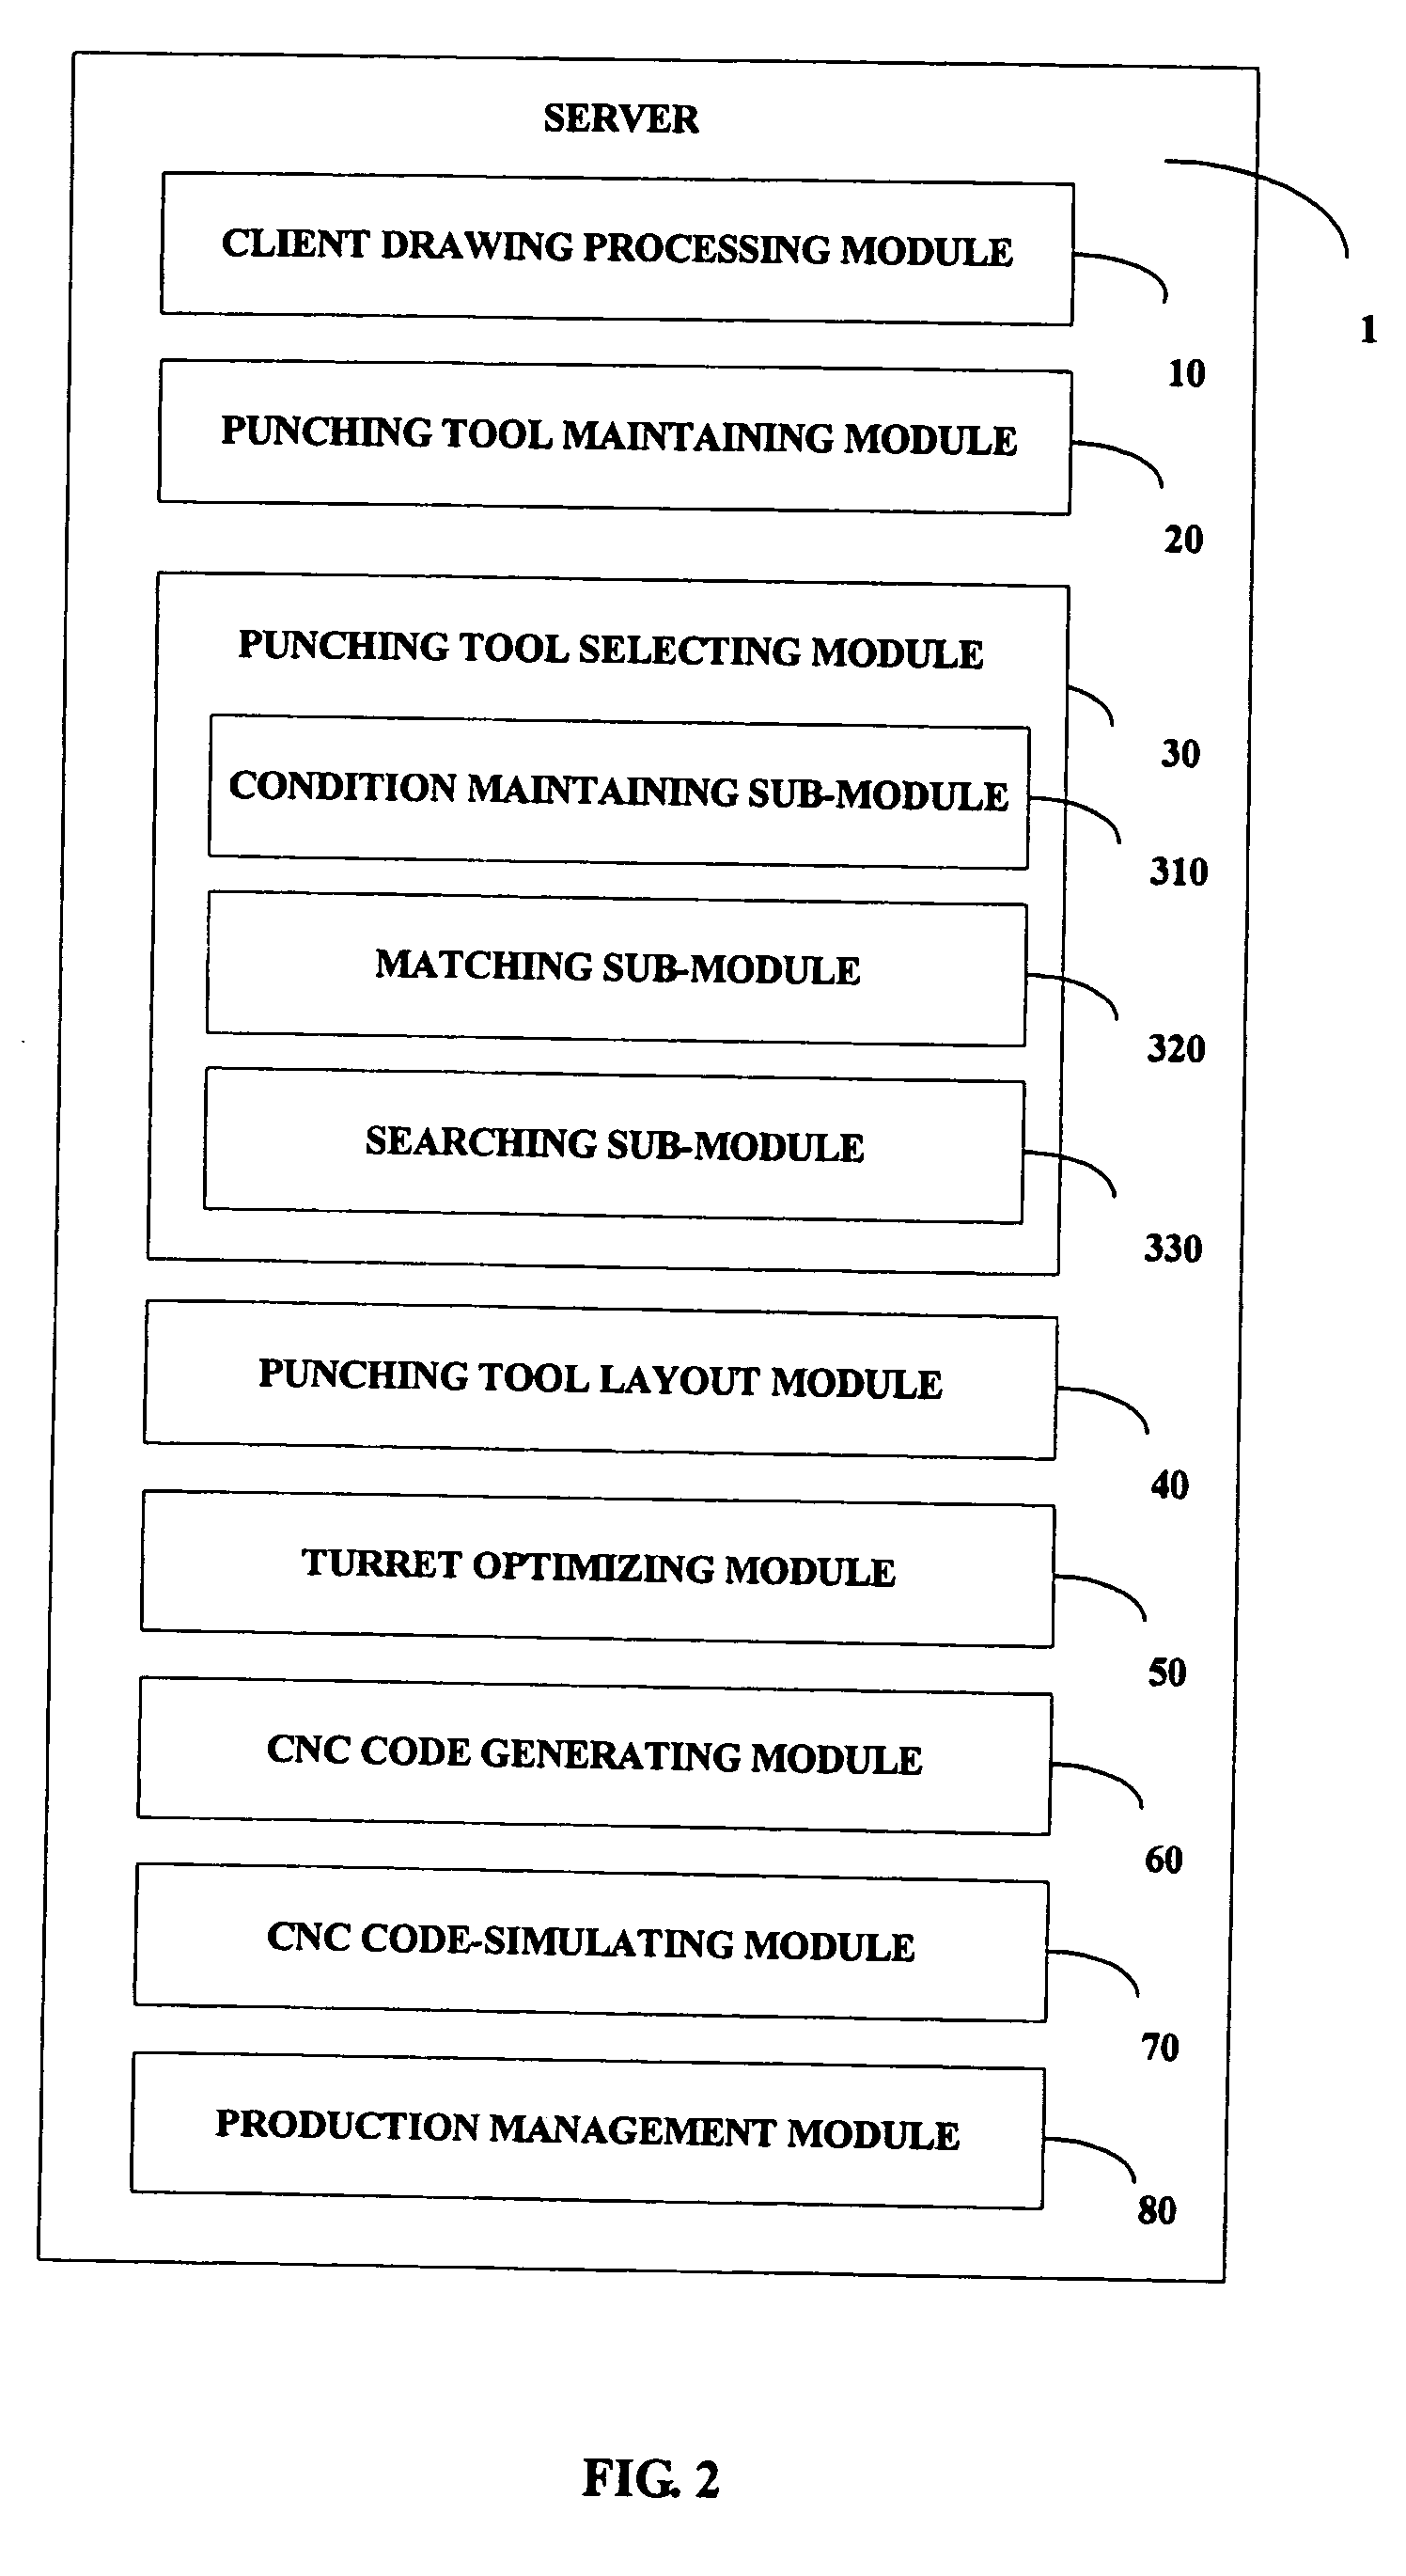 Computer-aided manufacturing system and method for sheet-metal punching